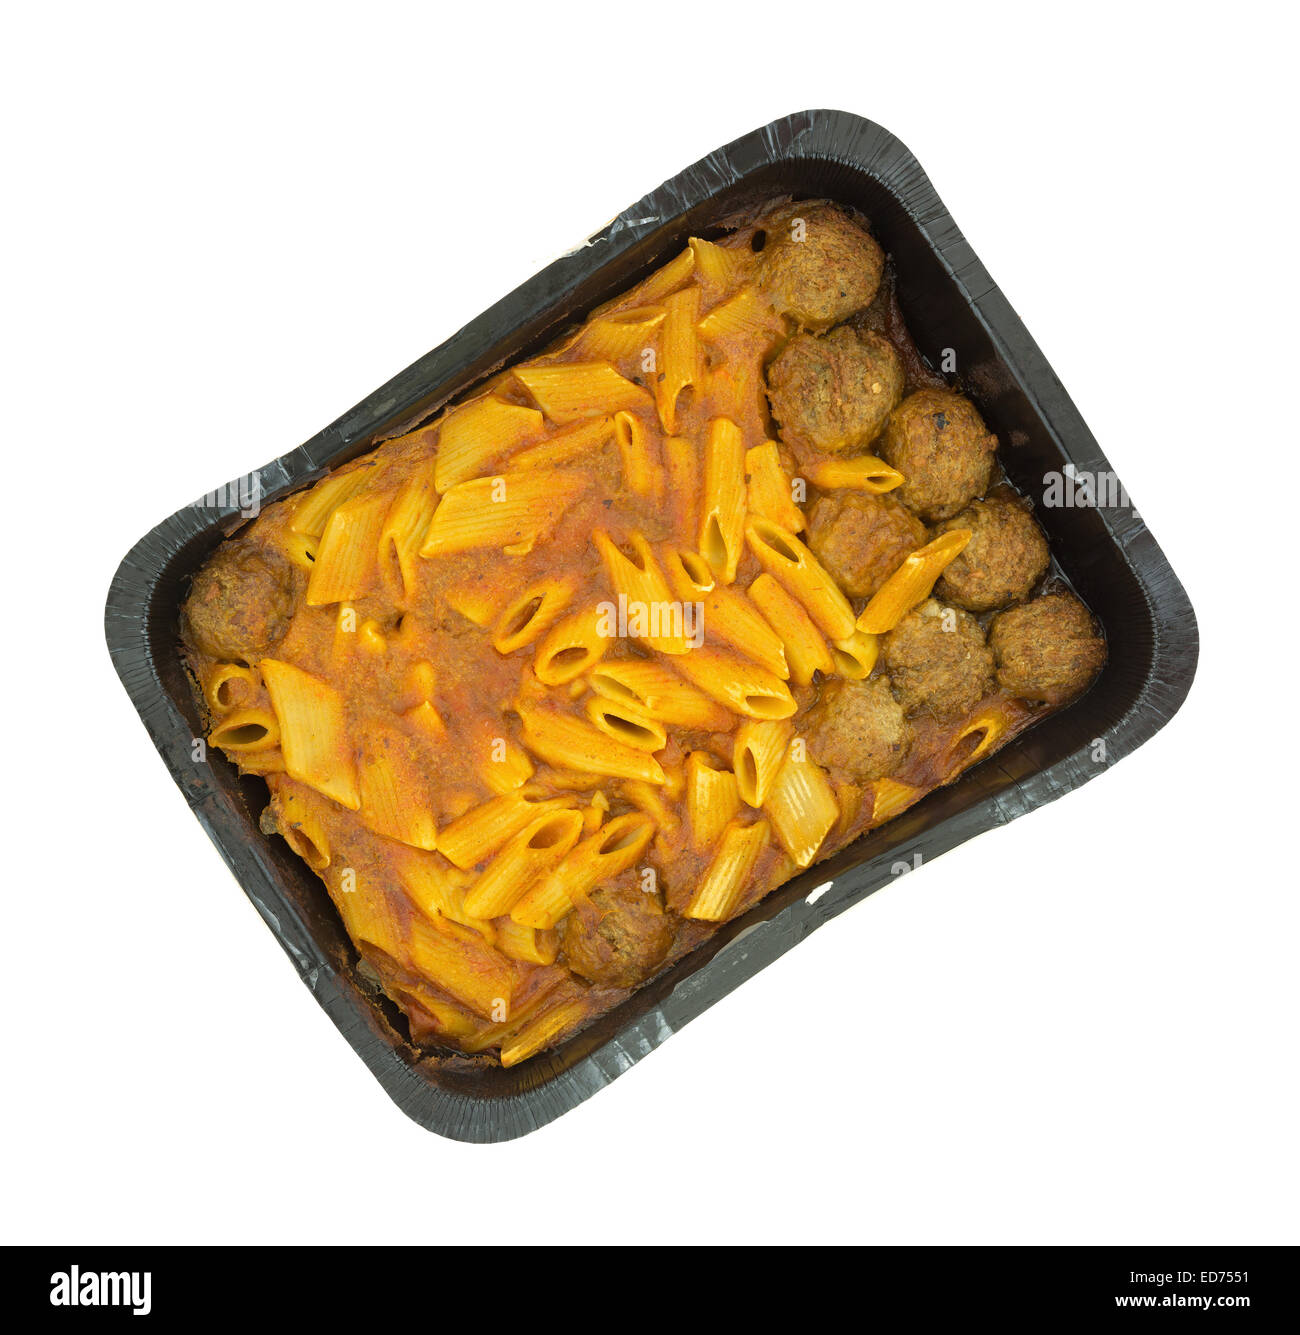 Top view of a very large serving of penne pasta in a tomato sauce with meatballs in a black tray atop a white background. Stock Photo